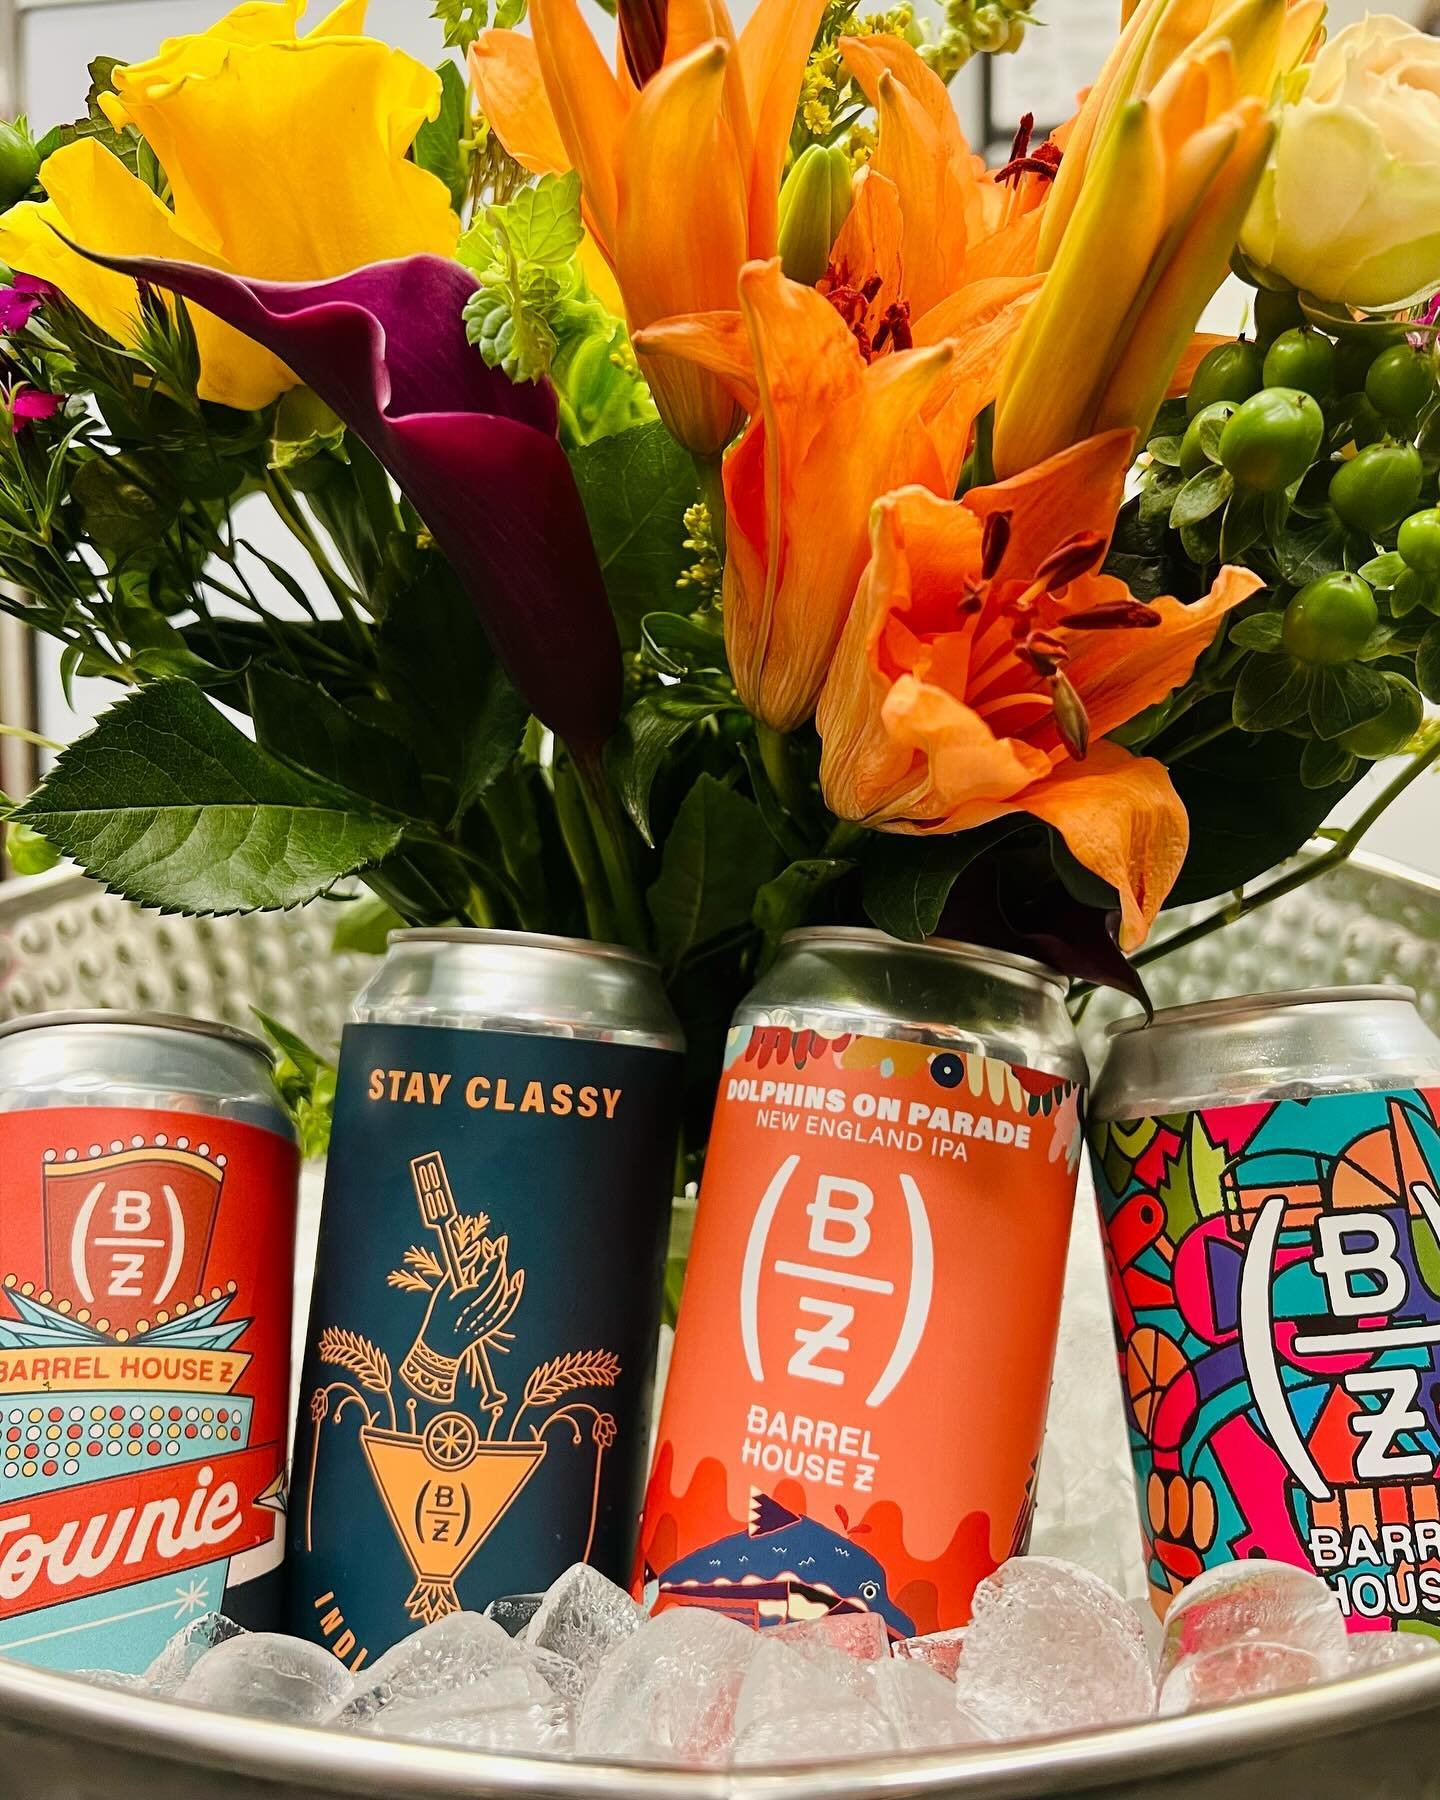 Beers &amp; bouquets for mom 💐🍻 Saturday taproom open until 11pm. 4-packs &amp; mixed 4-packs stocked. 

Cheers!